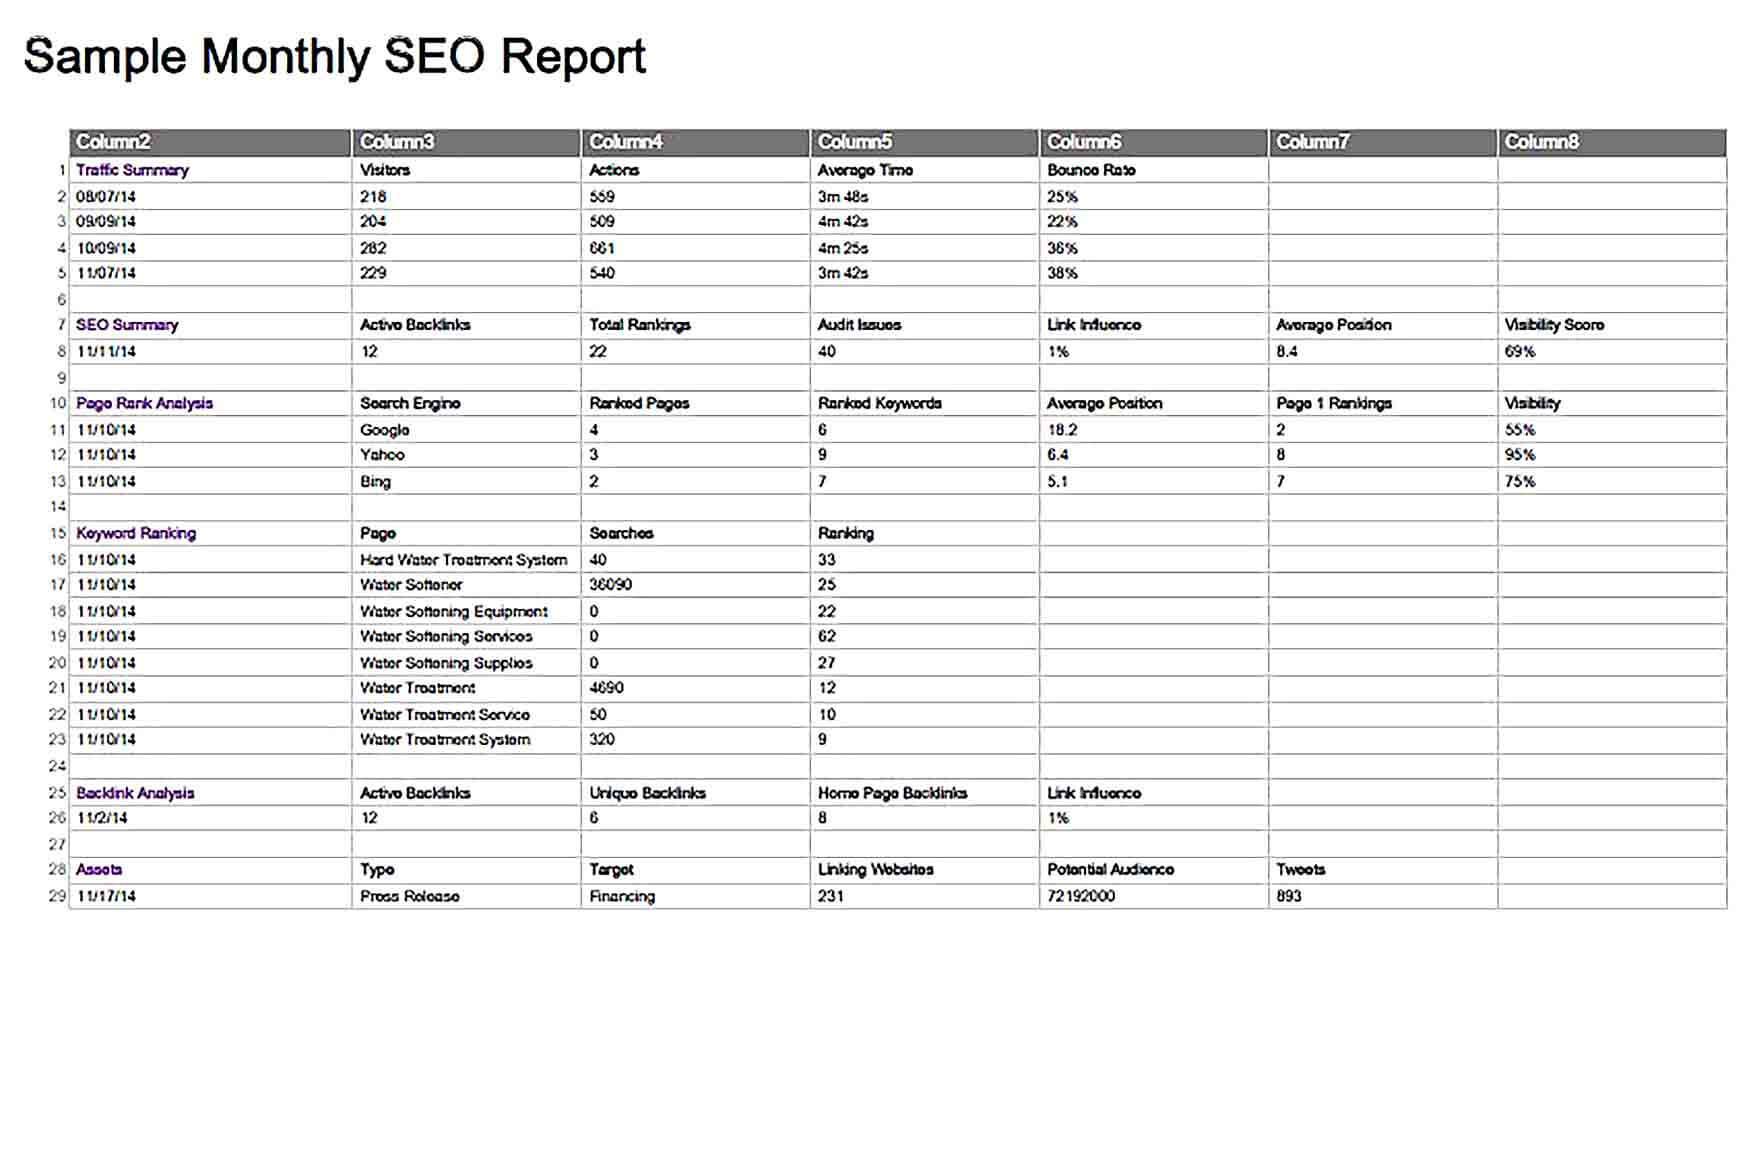 Sample Sample Monthly SEO Report